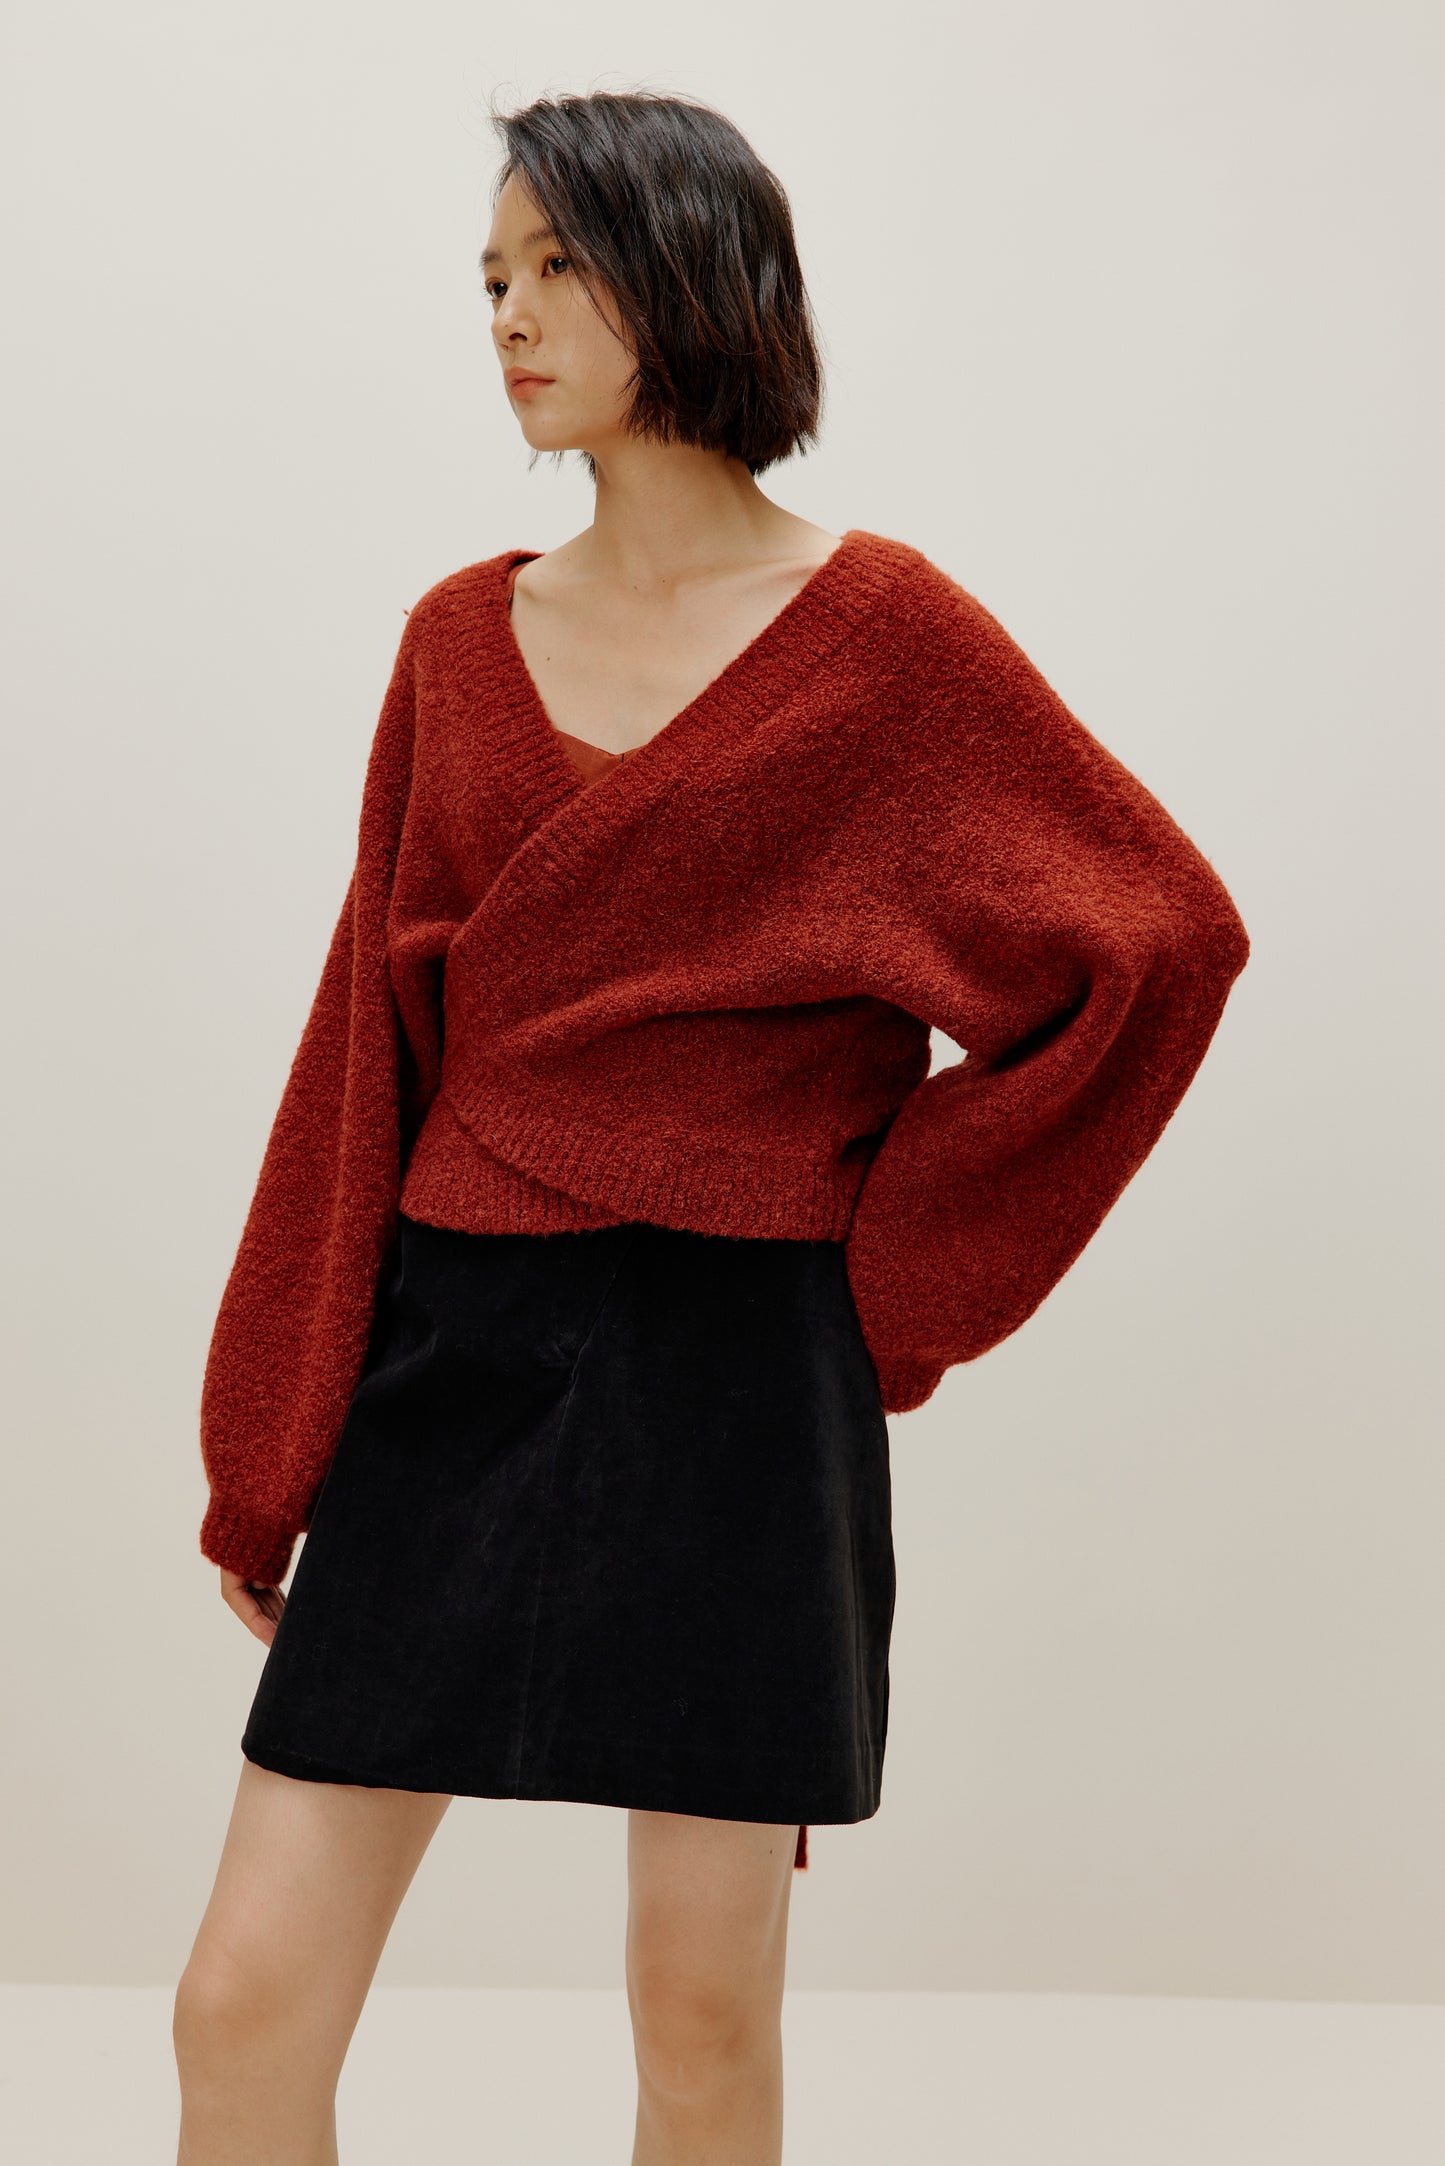 woman wearing a red wrap Cardigan and black skirt